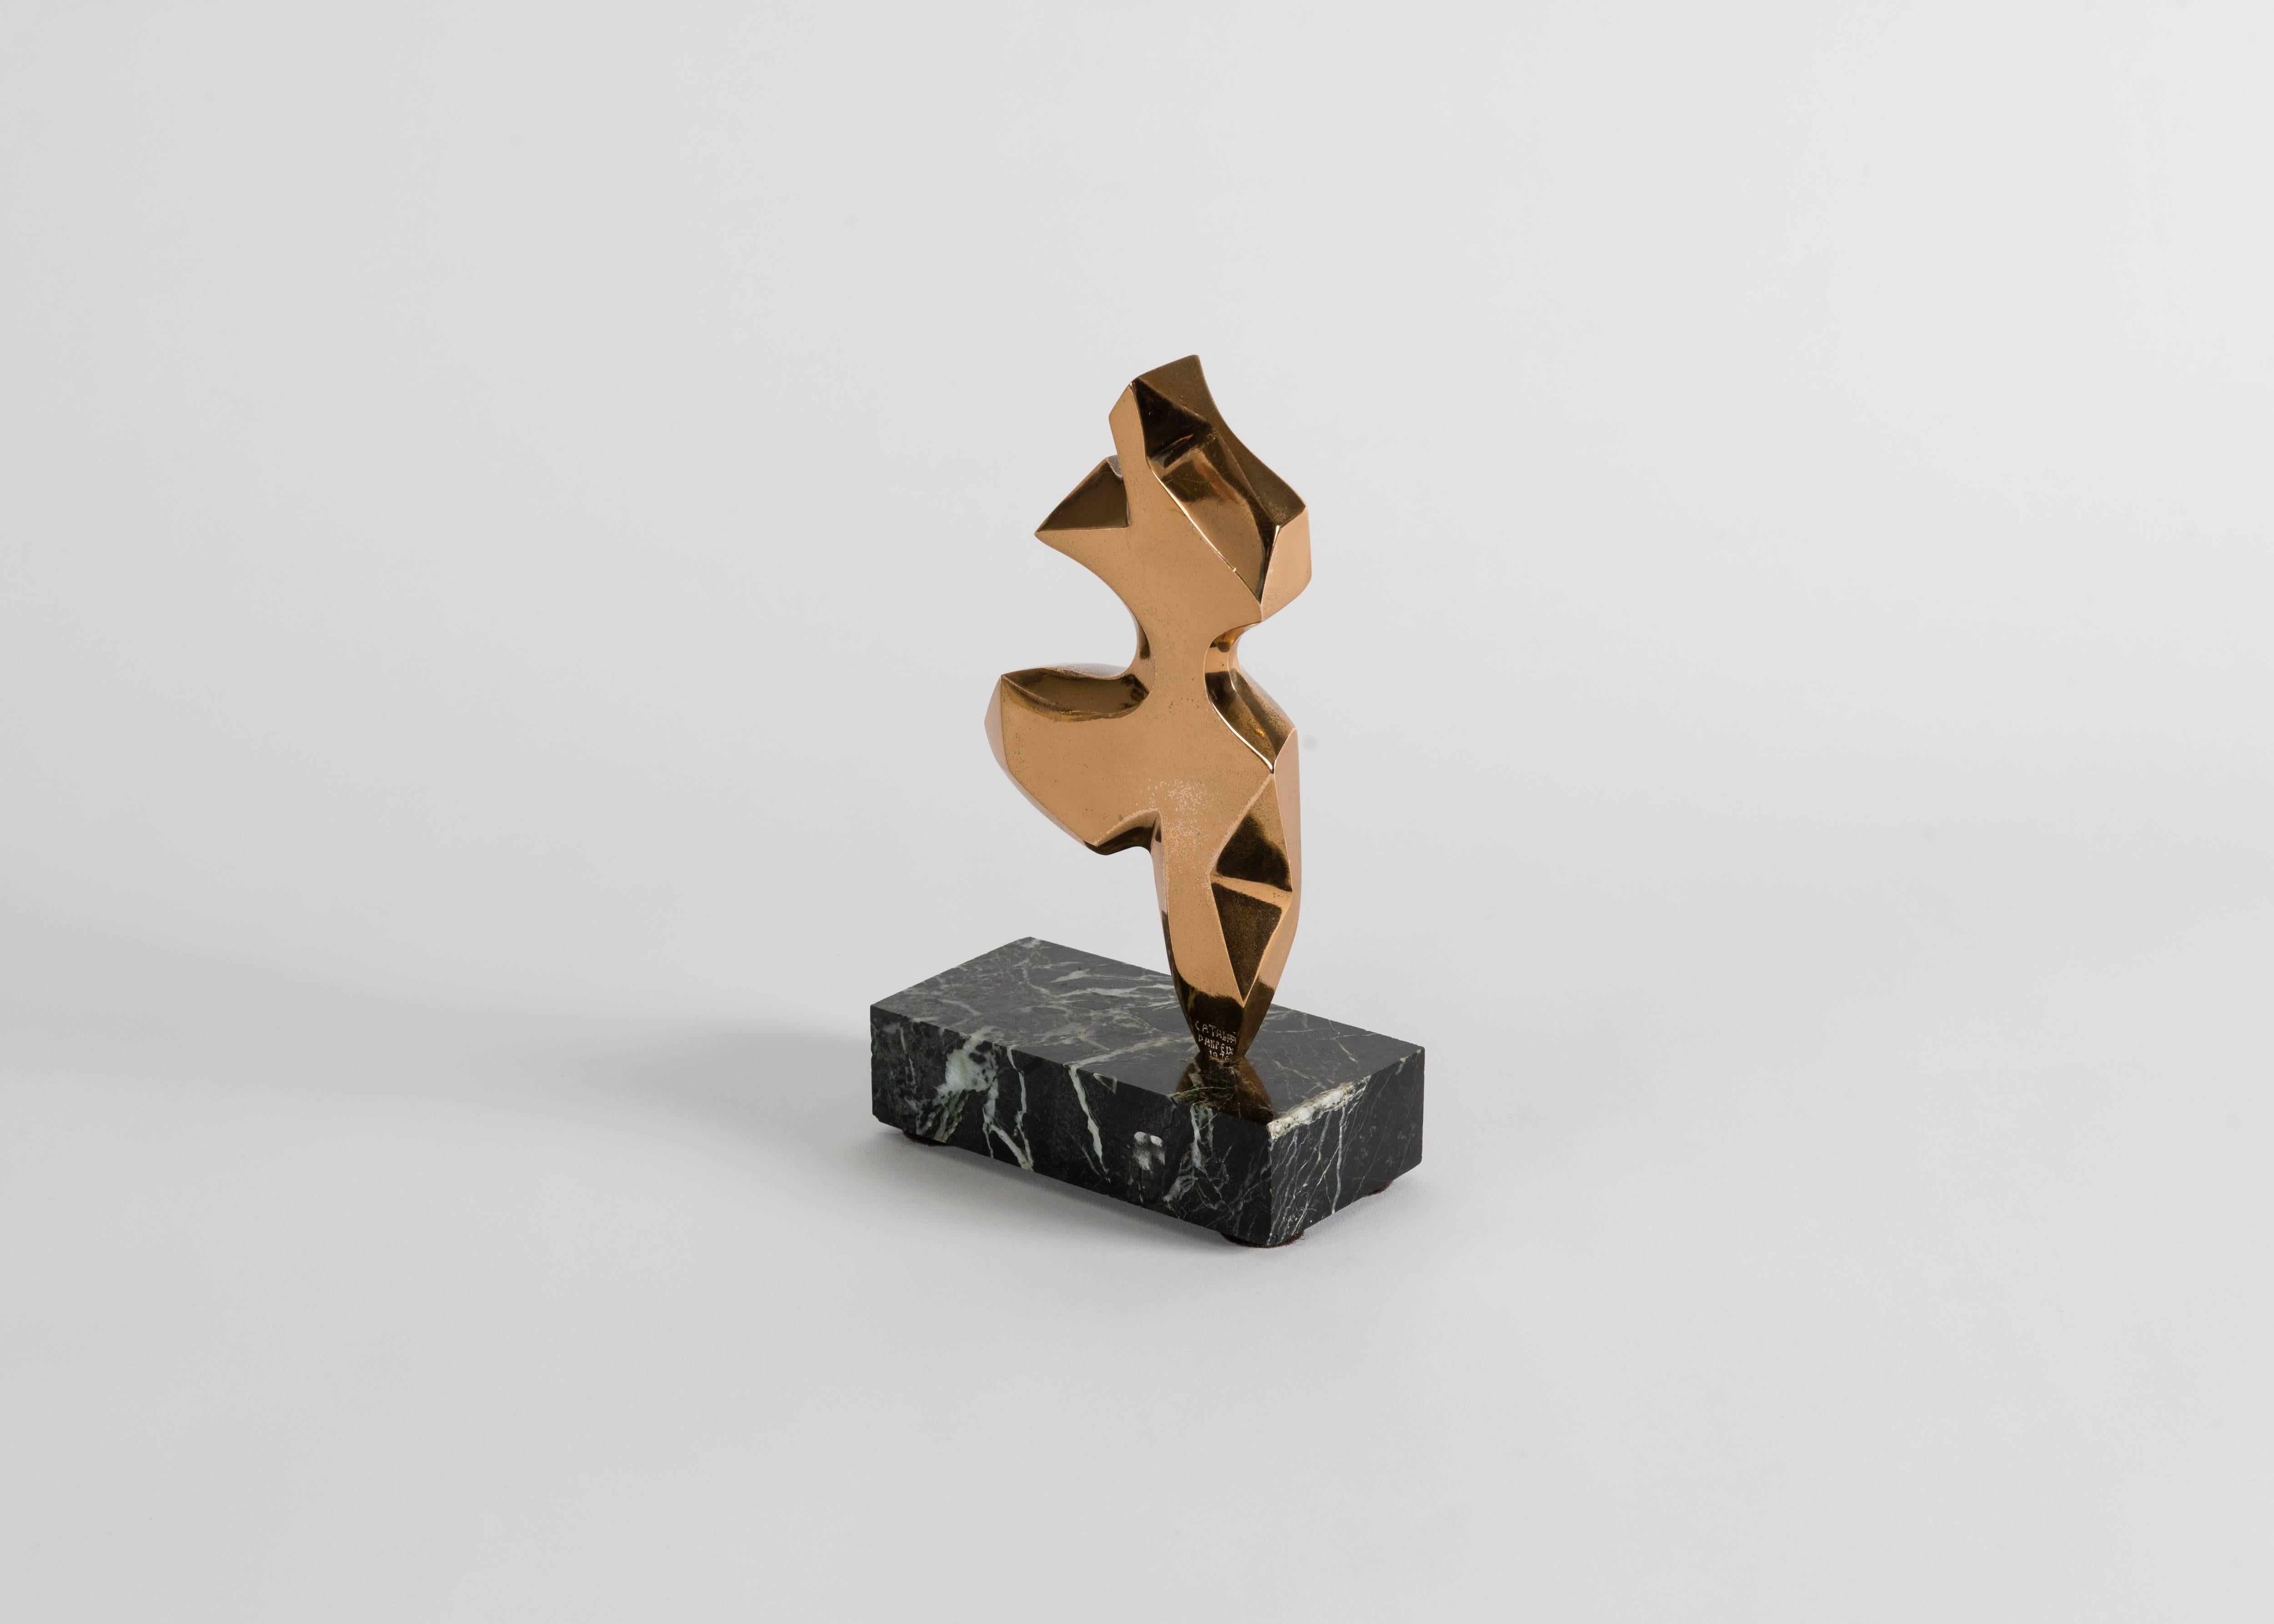 Signed and dated: Catalaa Darpeix, 1976

This remarkable bronze sculpture, which shimmers in the light above its rectangular marble base, intimates the shape and motion of a dancer.